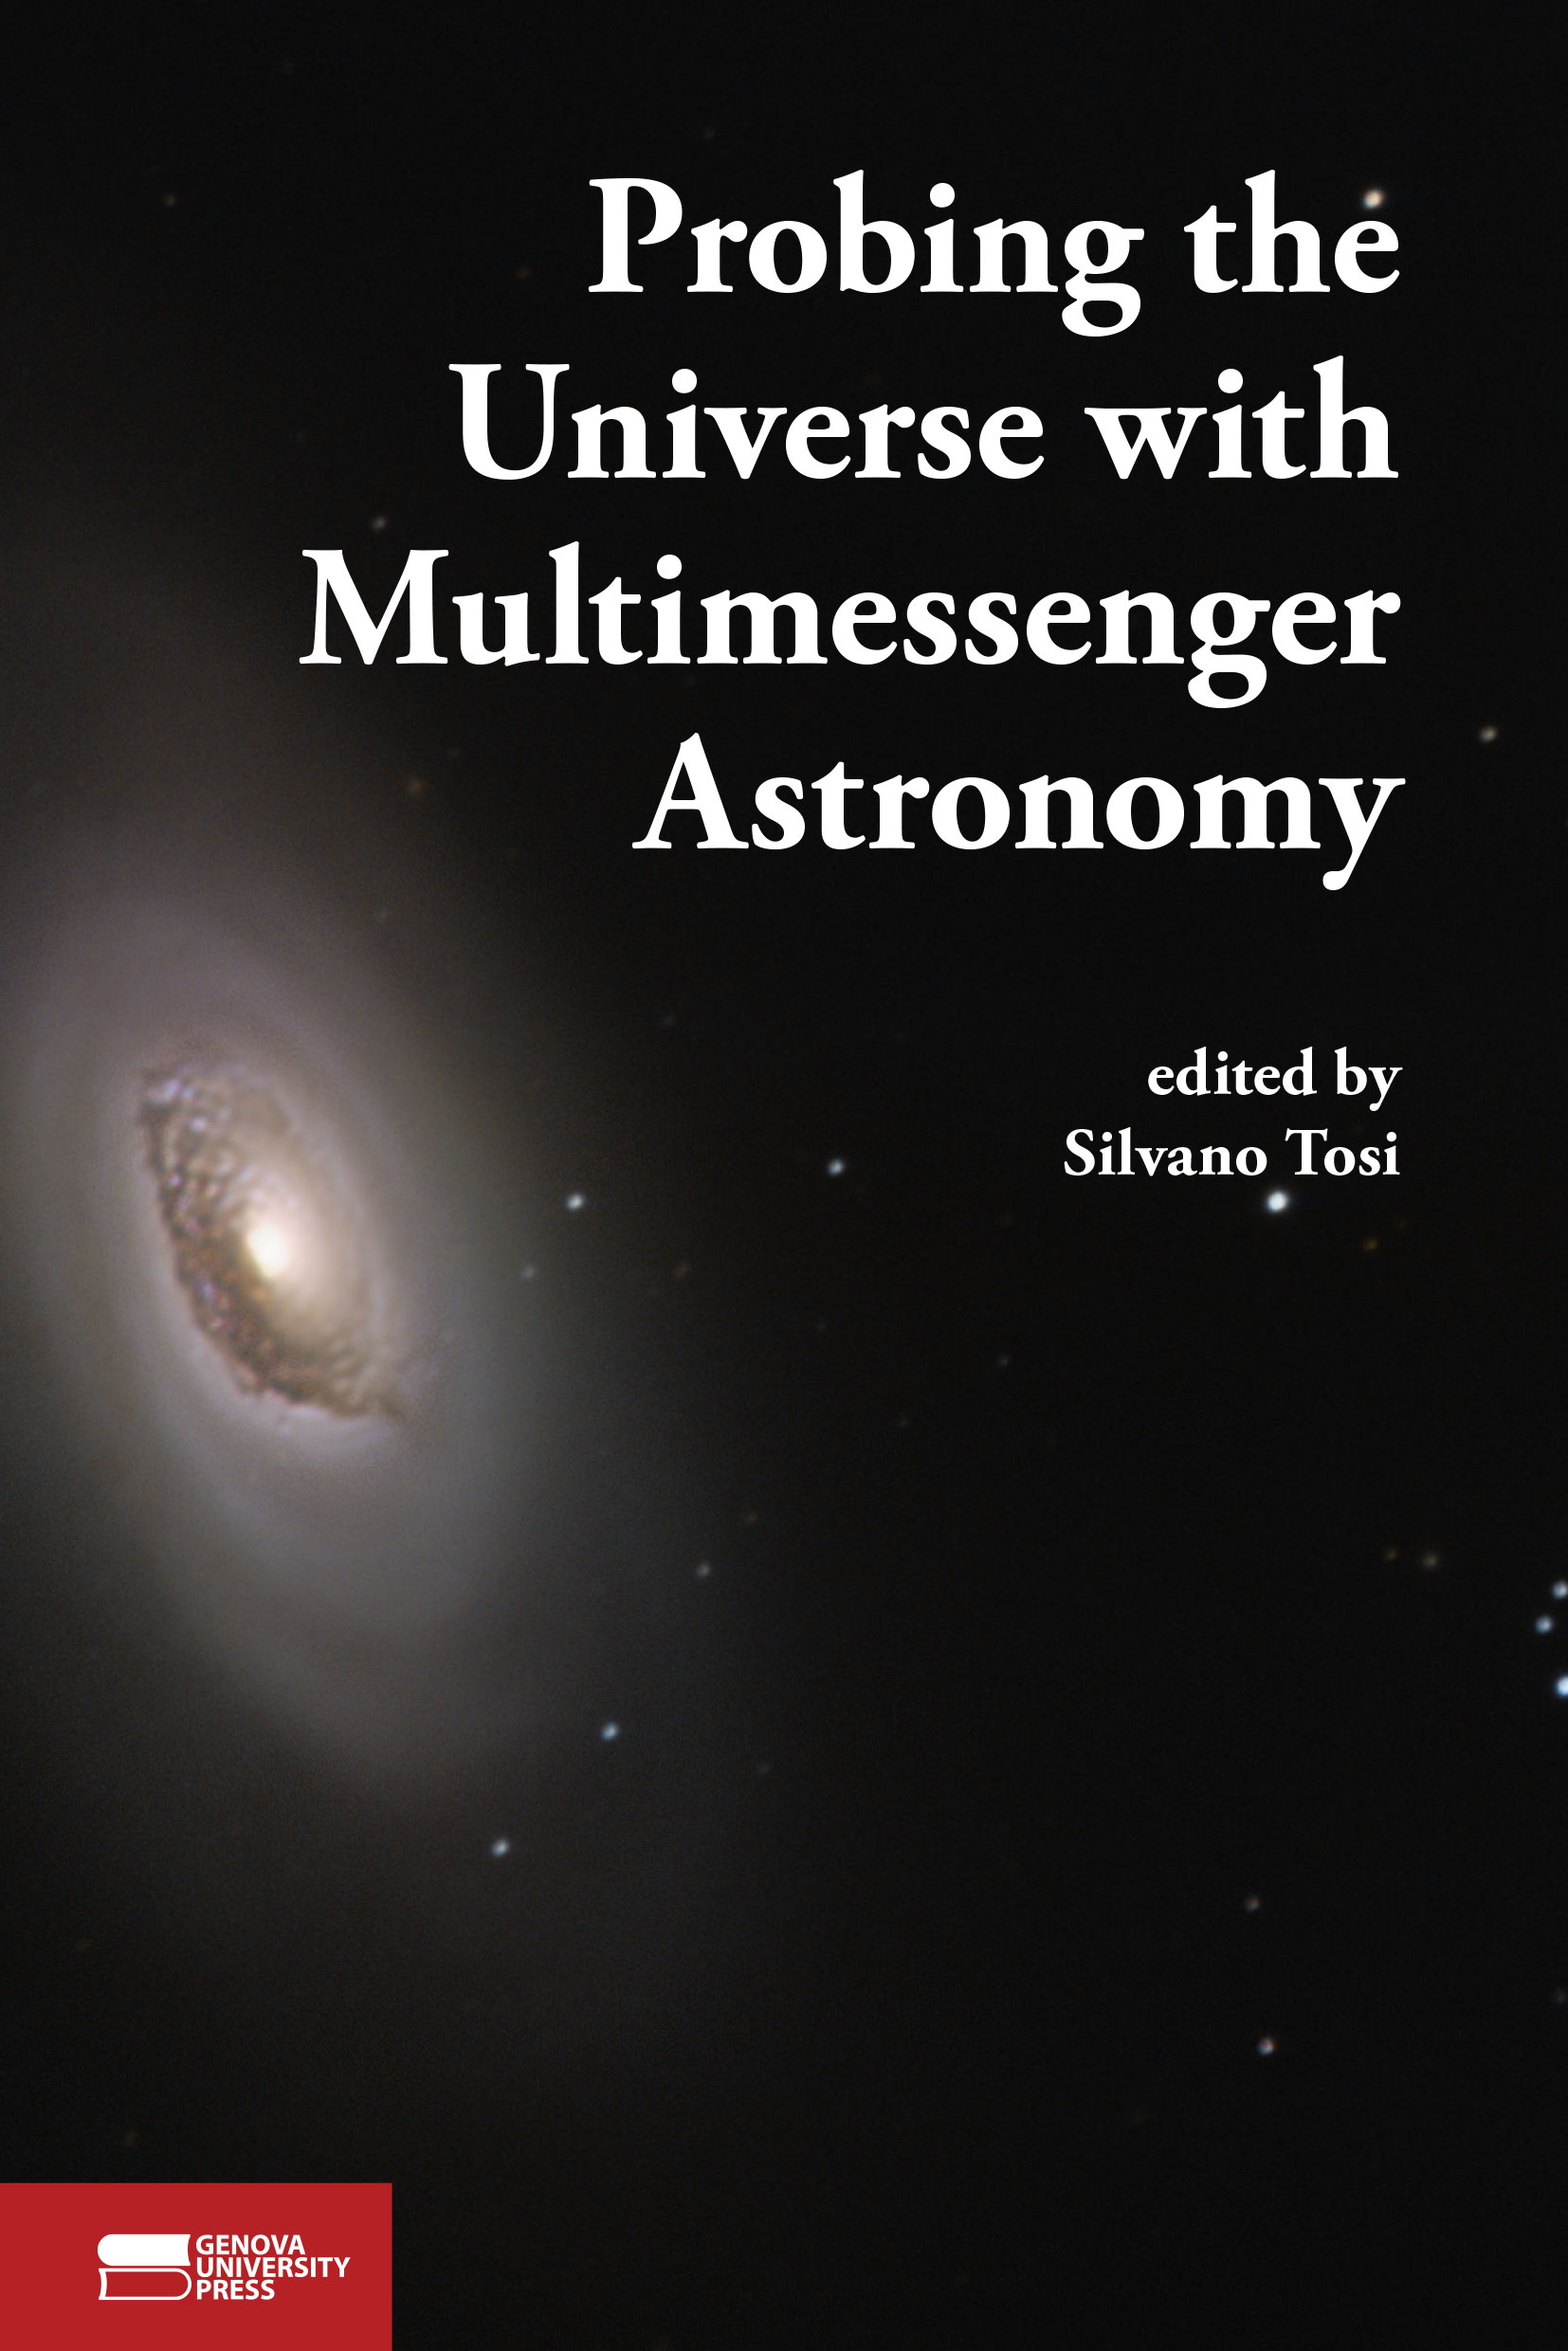 Probing the Universe with Multimessenger Astronomy